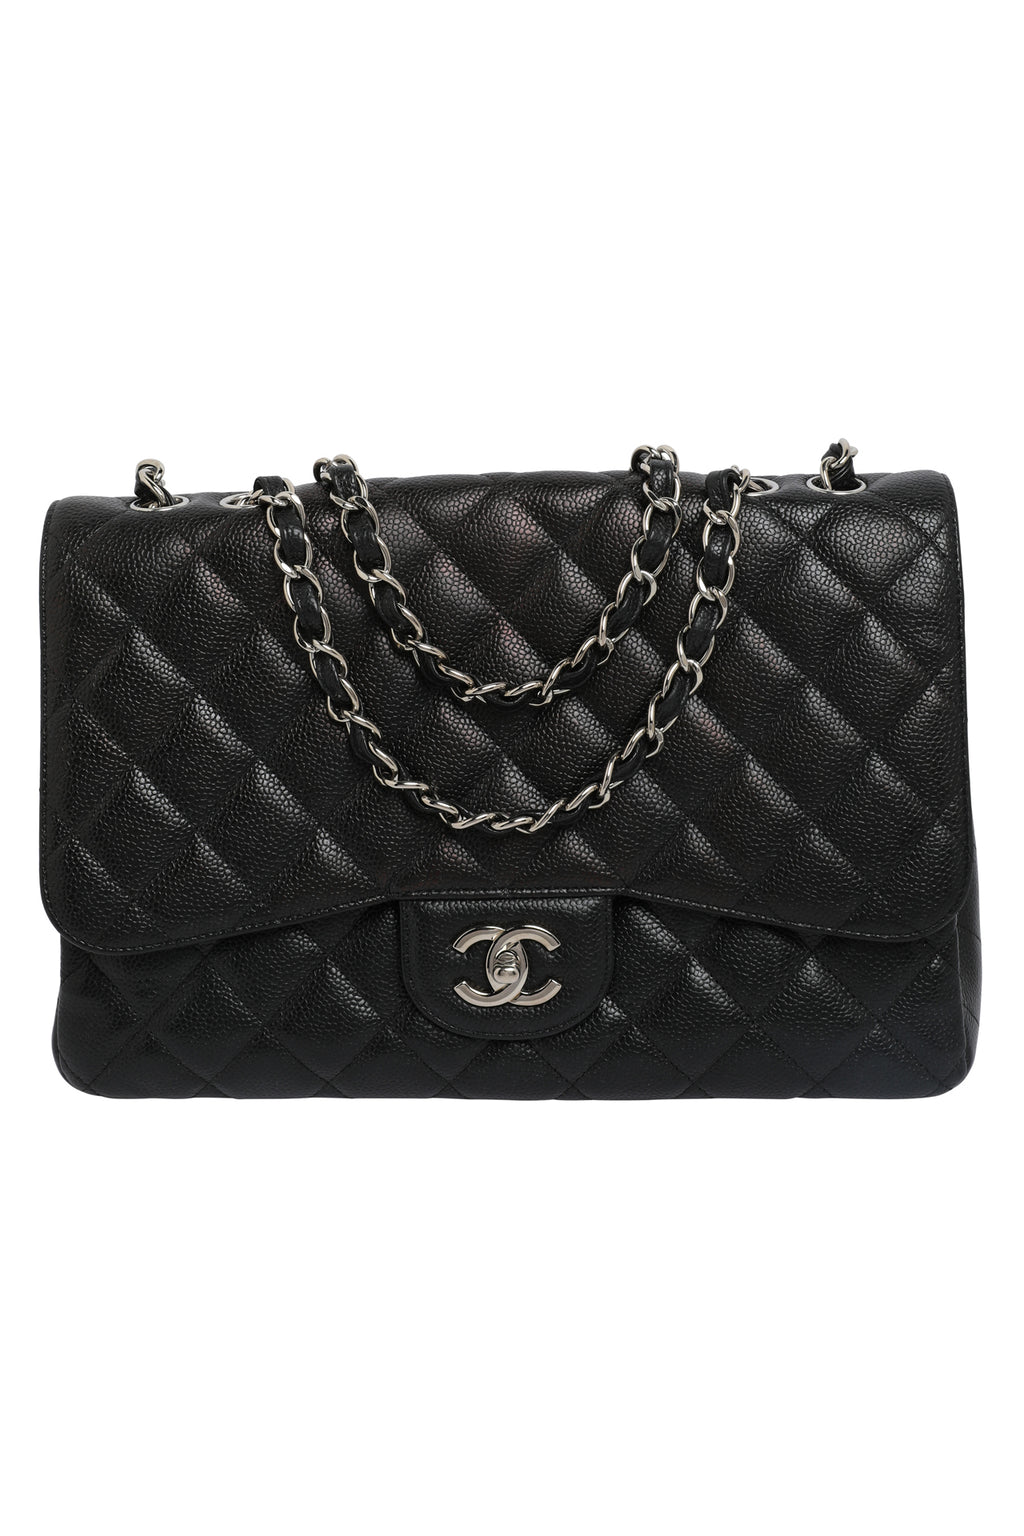 Chanel Caviar Quilted Single Flap Bag Large